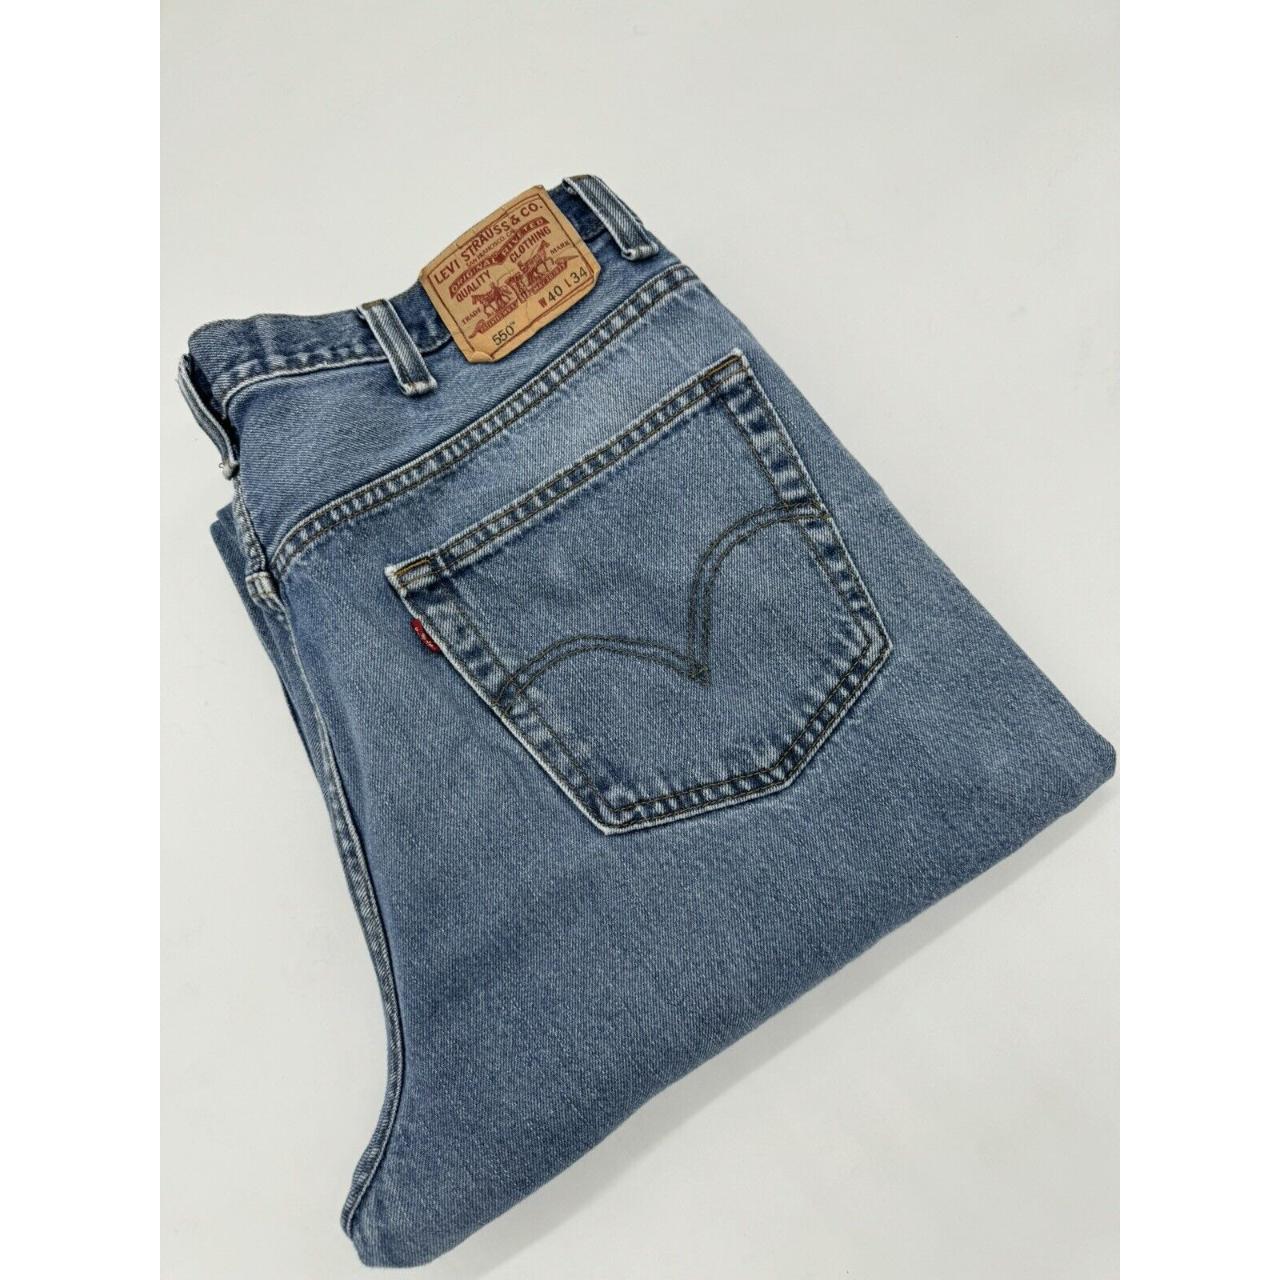 Upgrade your denim collection with these vintage... - Depop